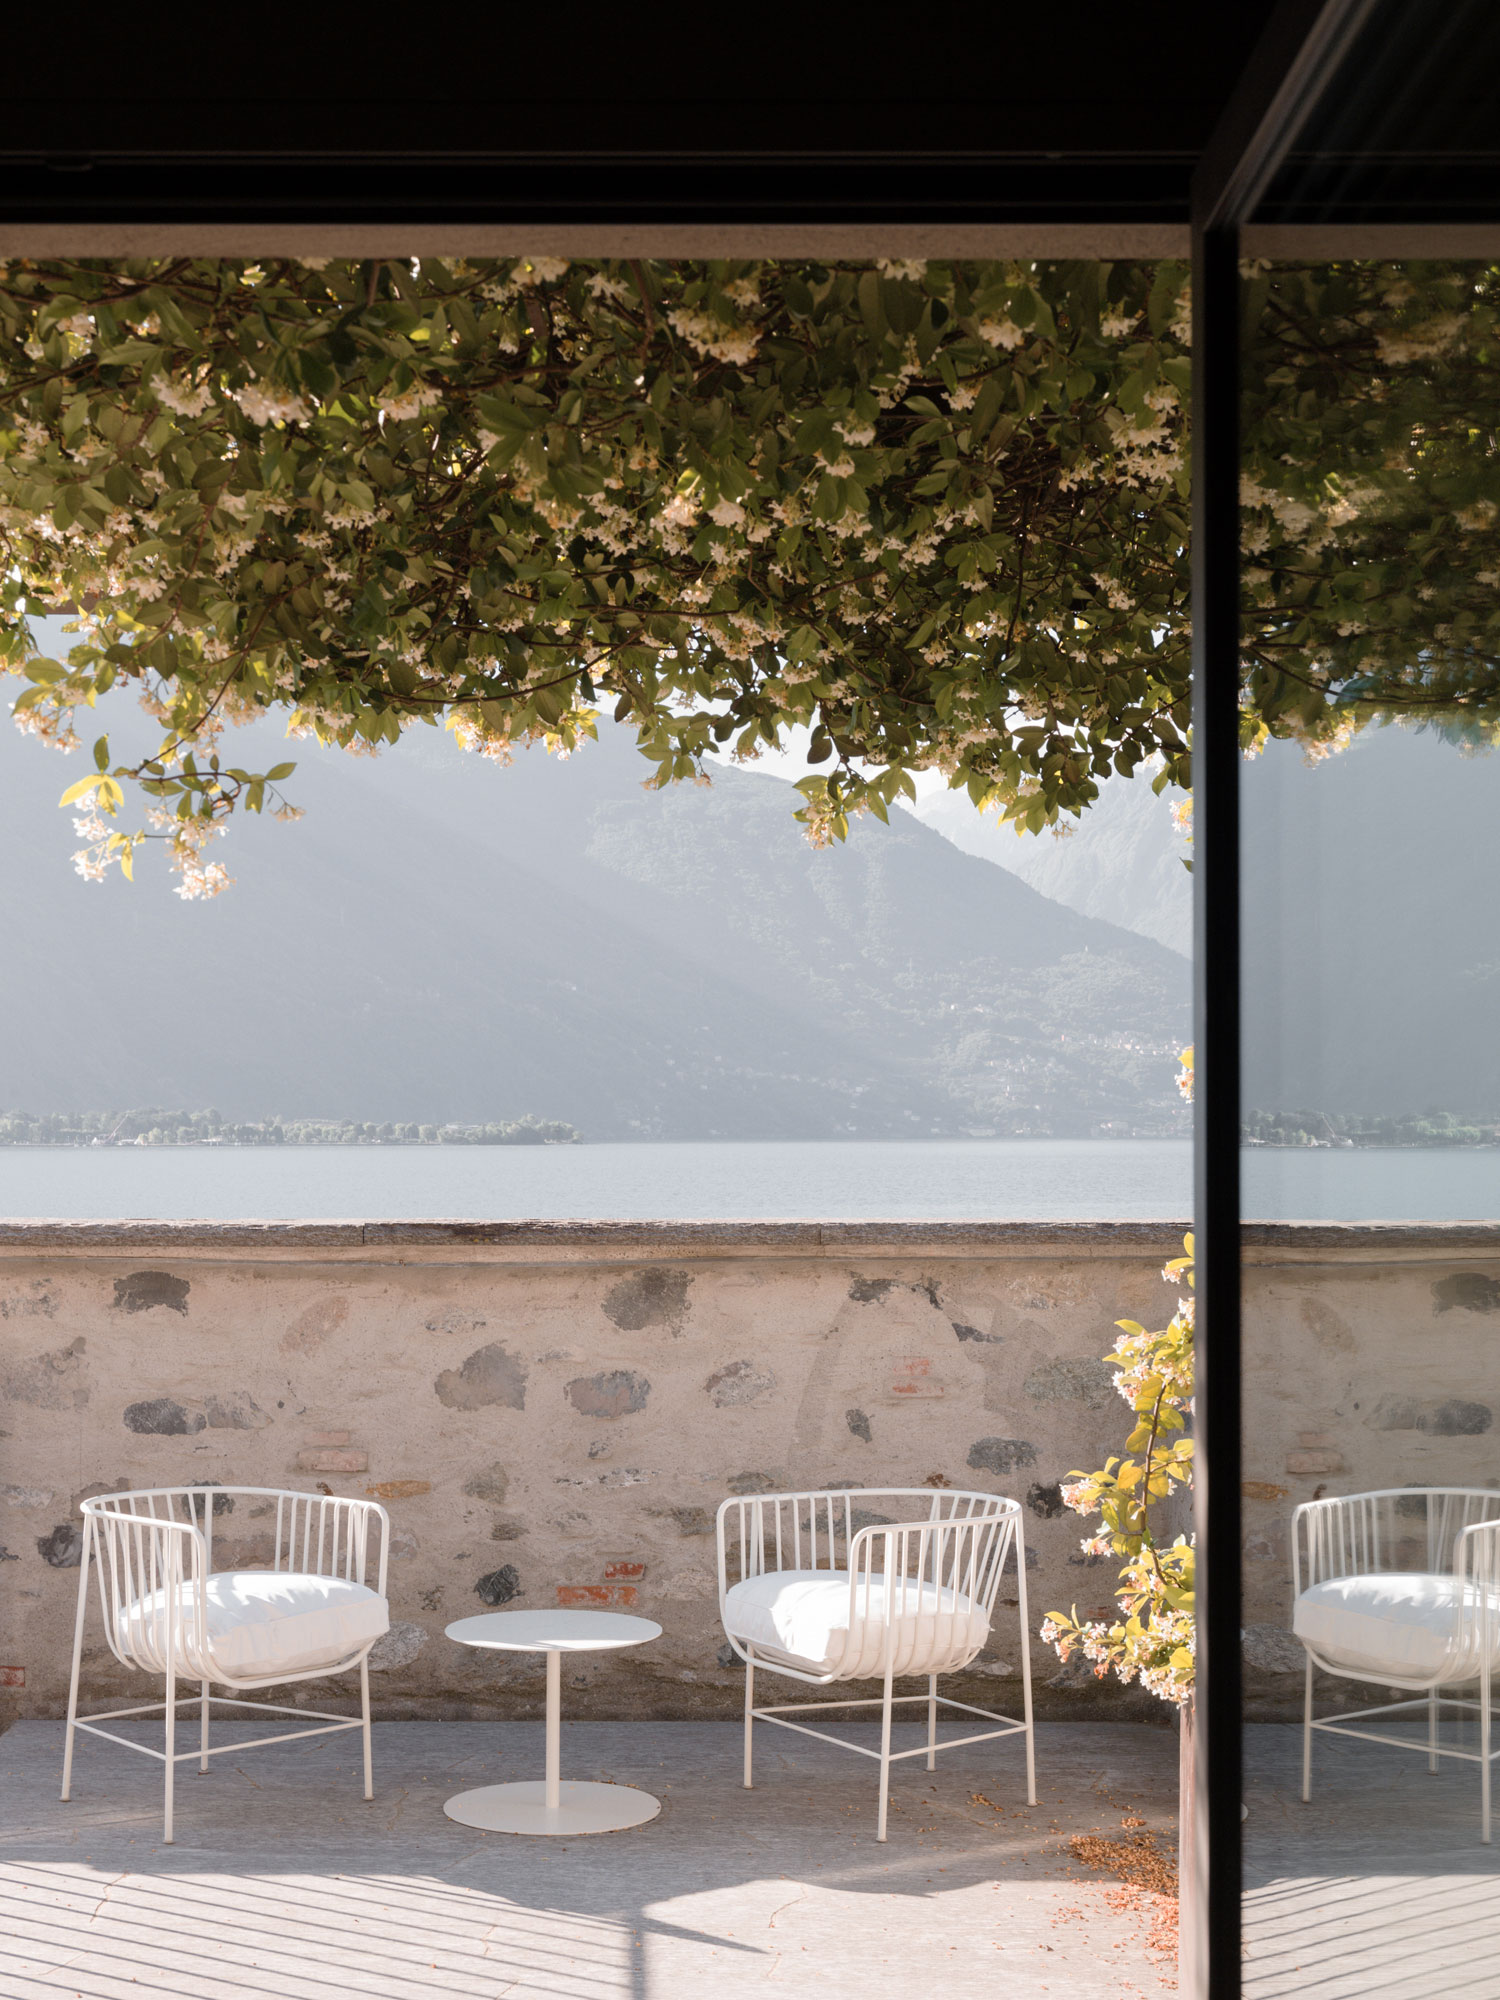 Casa Olea Hotel is a renovated old vicarage located in Cremia, Lake Como - Italy, with 13 beautifully captivating rooms and suites to make your holiday exclusive and relaxing.